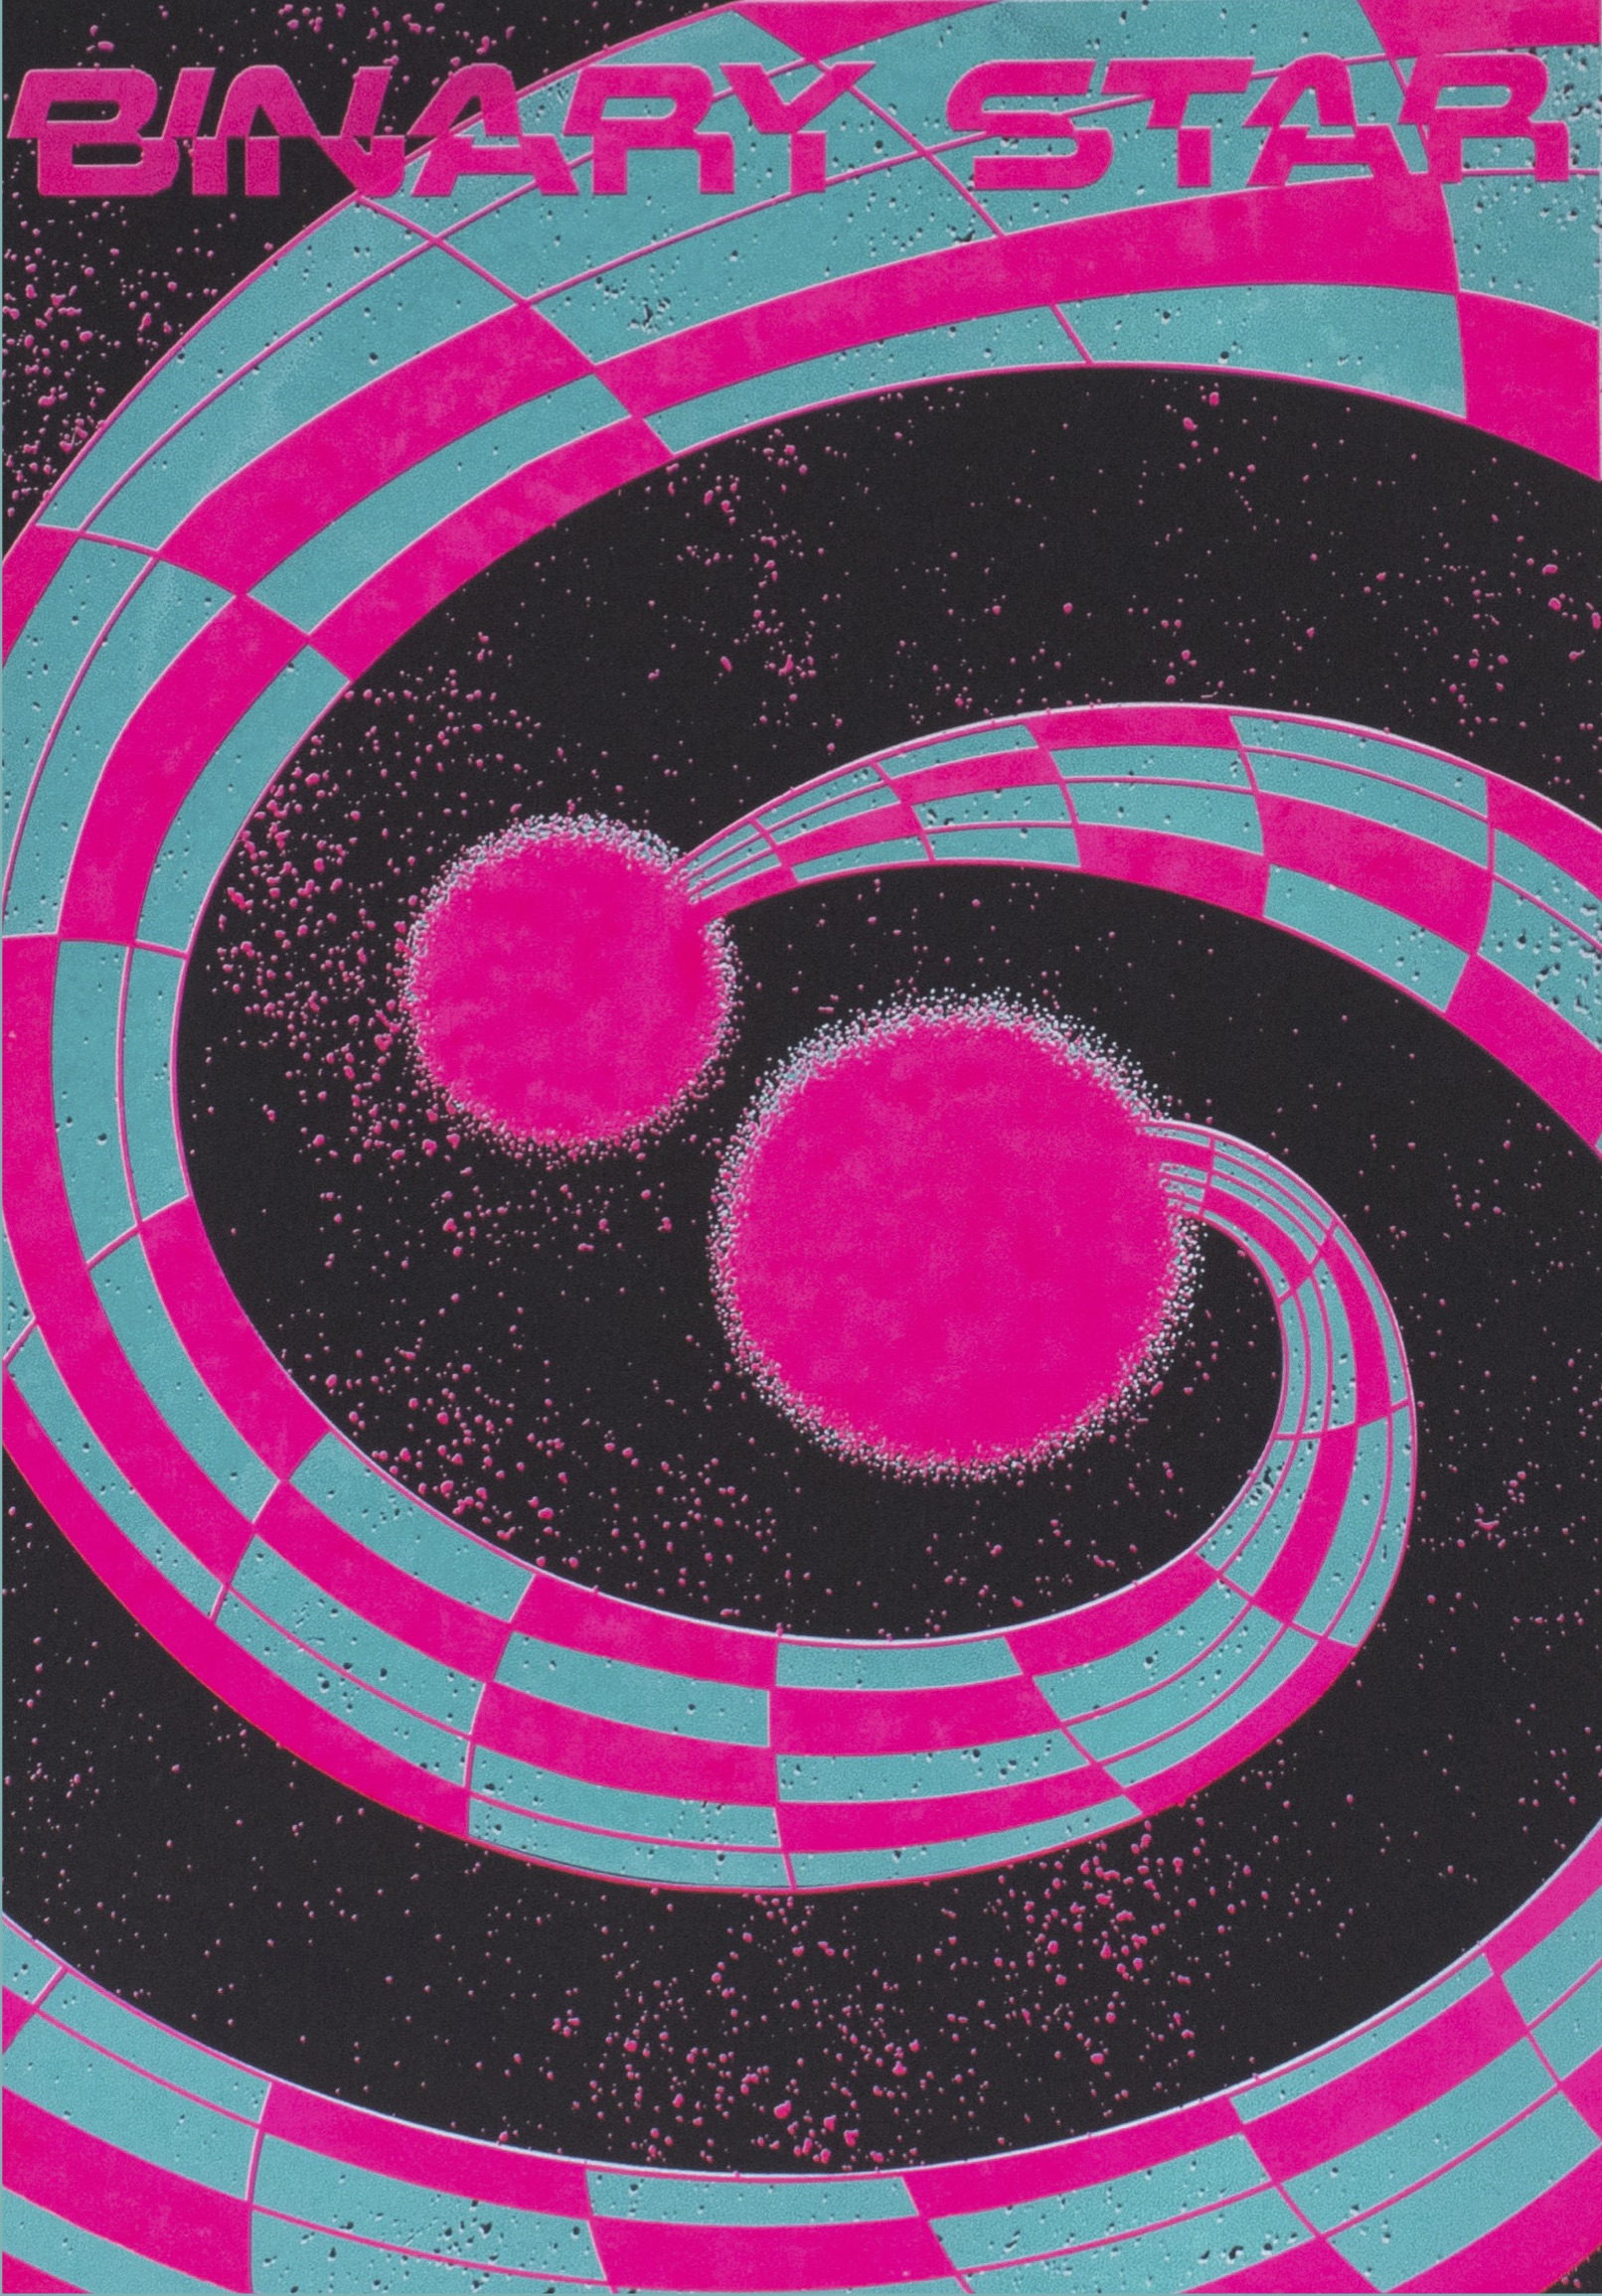 BA Illustration A3 screen print by Marianne Sleiman showing a layered pink and teal screen print on black paper, depicting the space theory: binary stars.